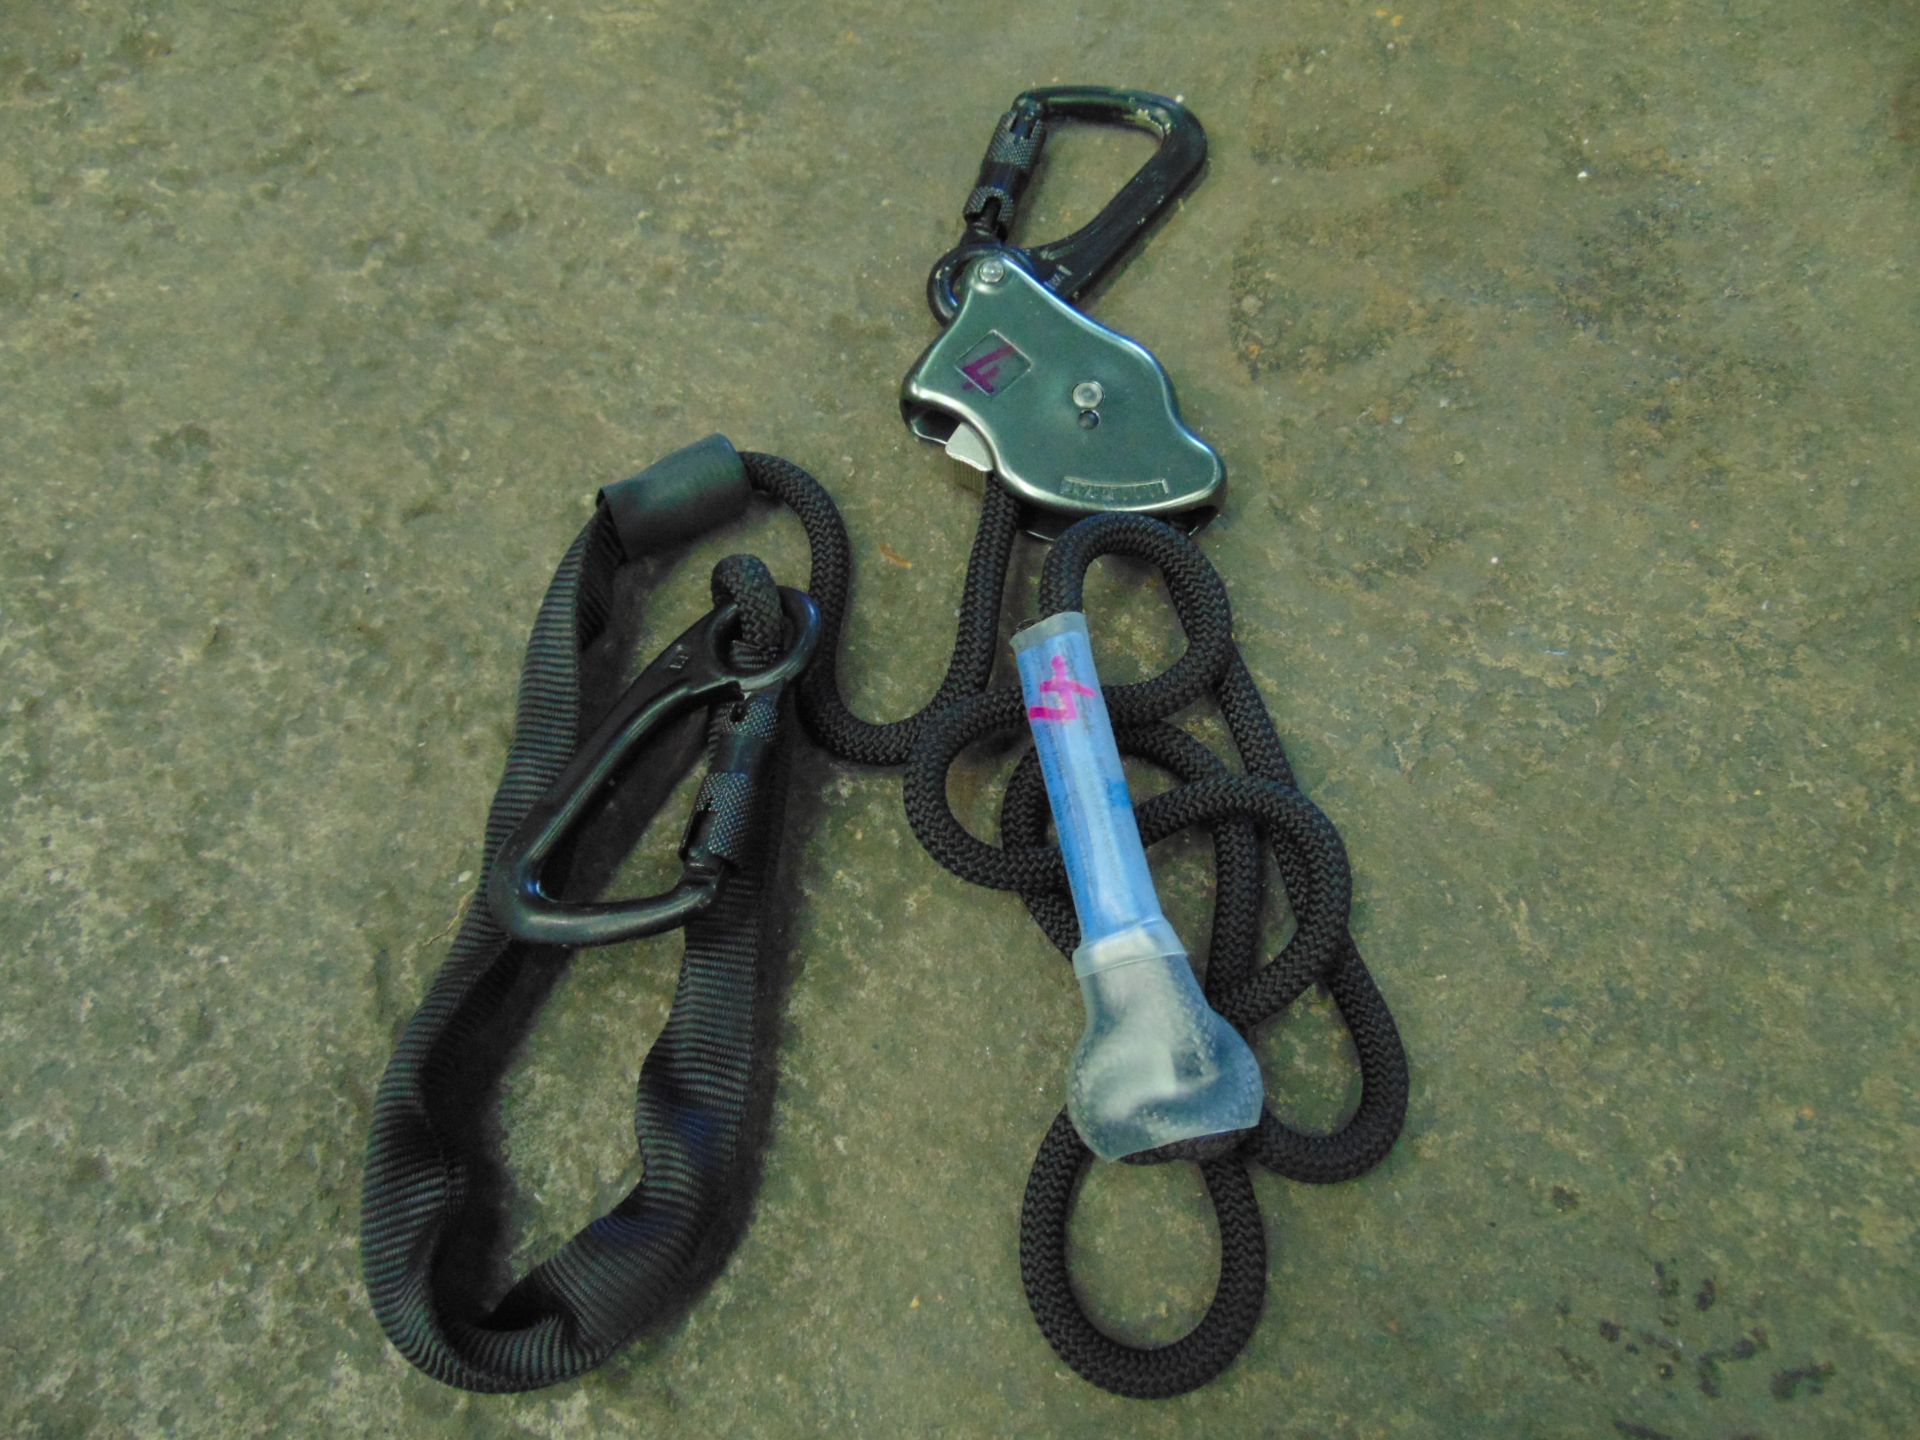 Spanset Full Body Harness with Work Position Lanyards etc - Image 4 of 24